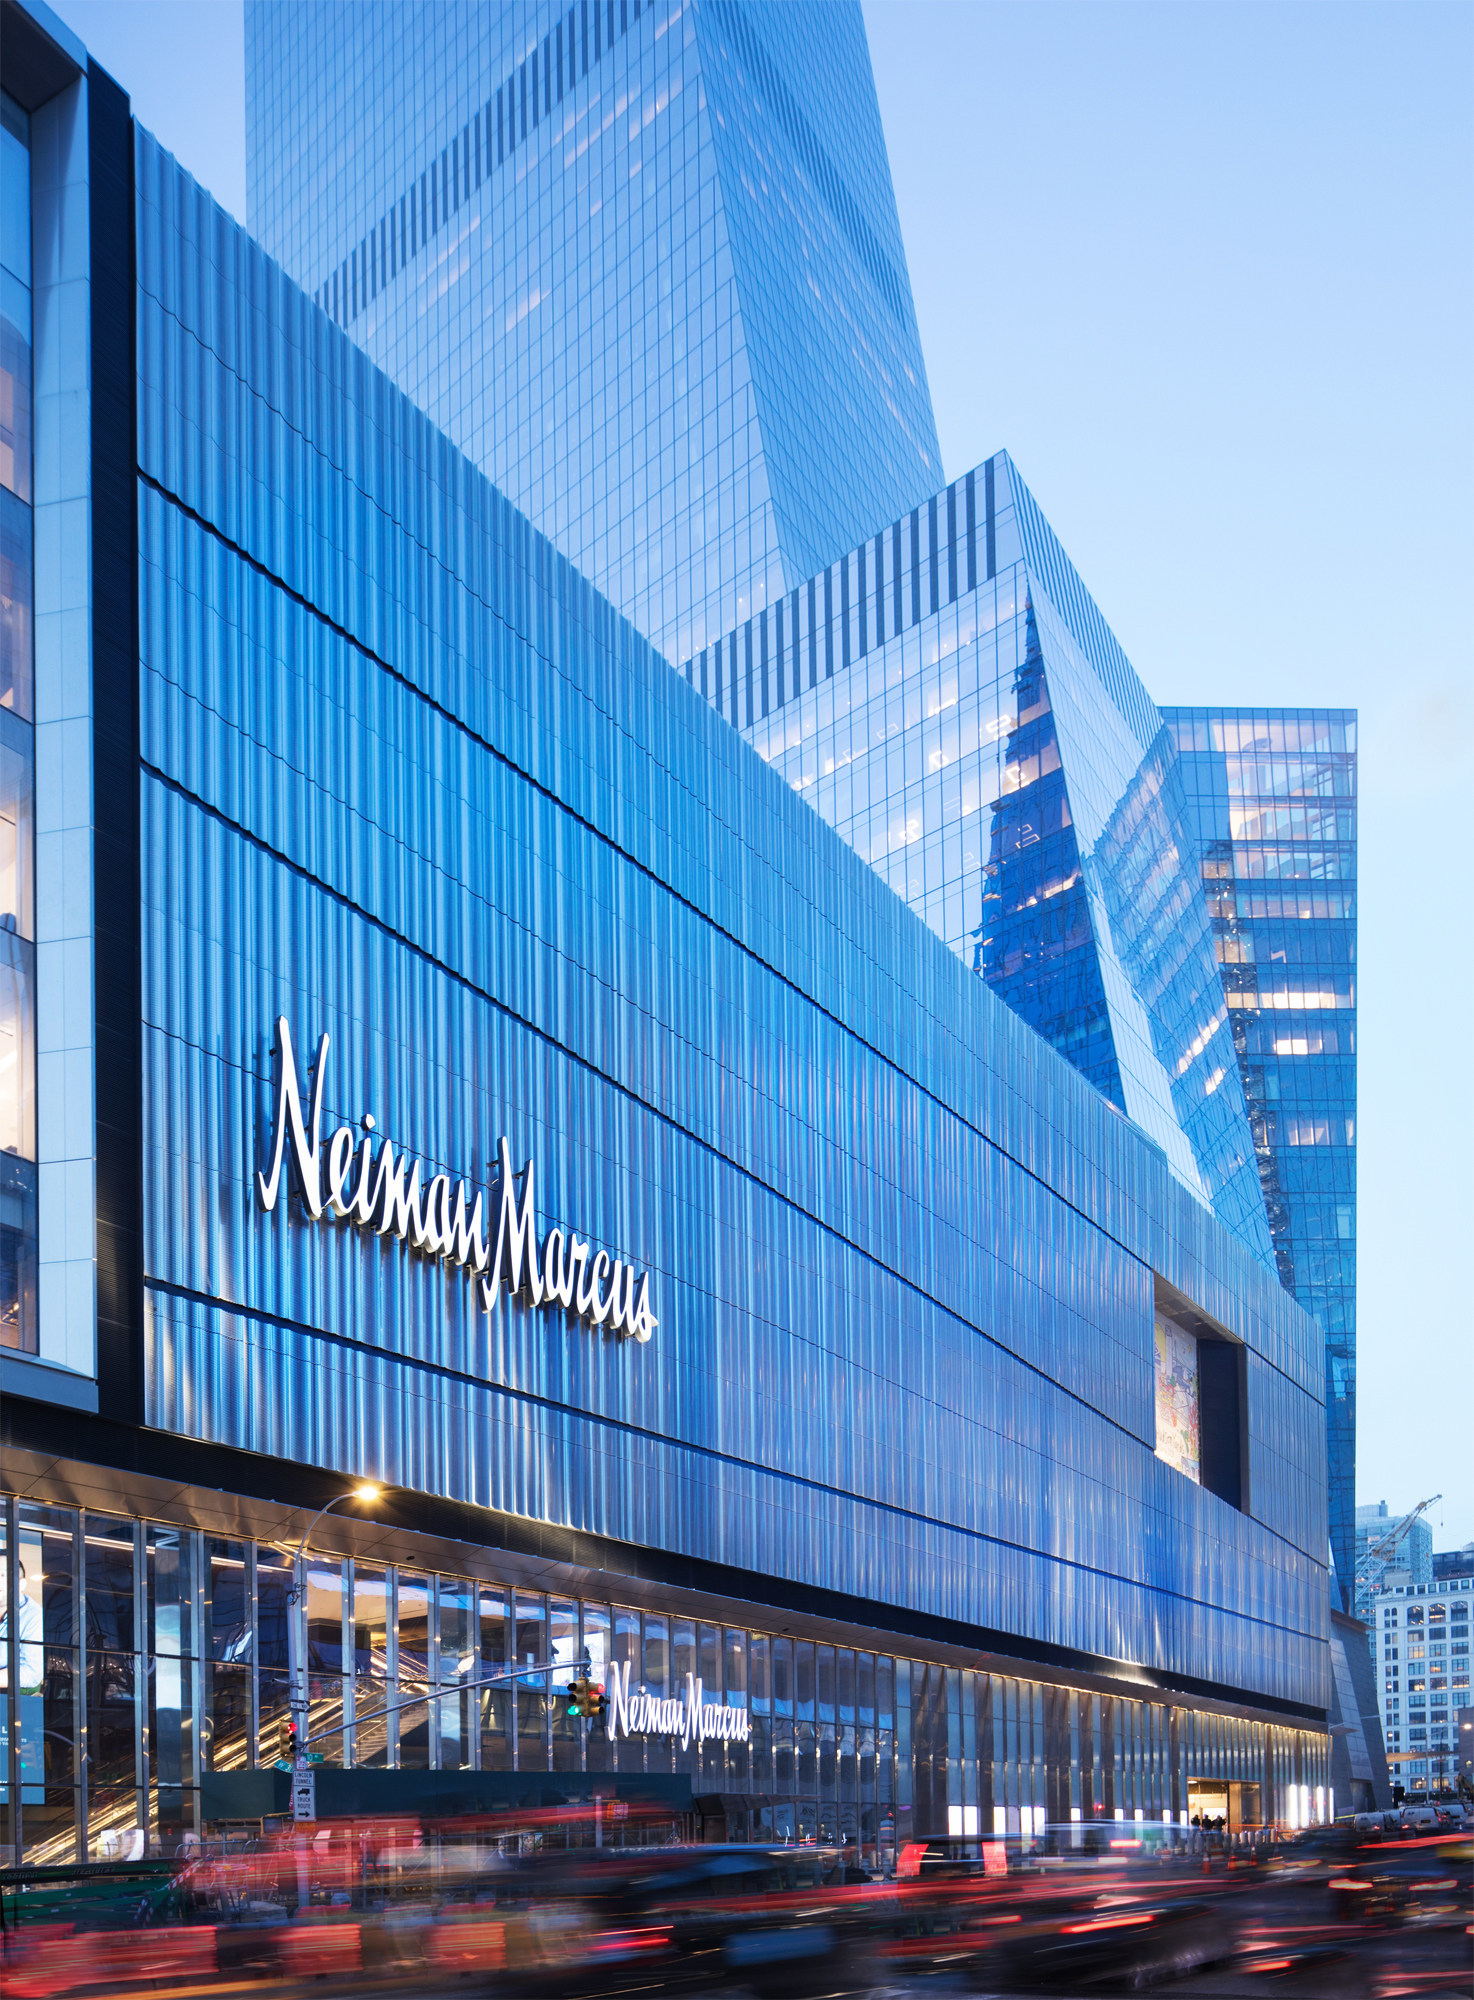 Neiman Marcus Store Services, The best way to shop is your way! # NeimanMarcus  By Neiman Marcus